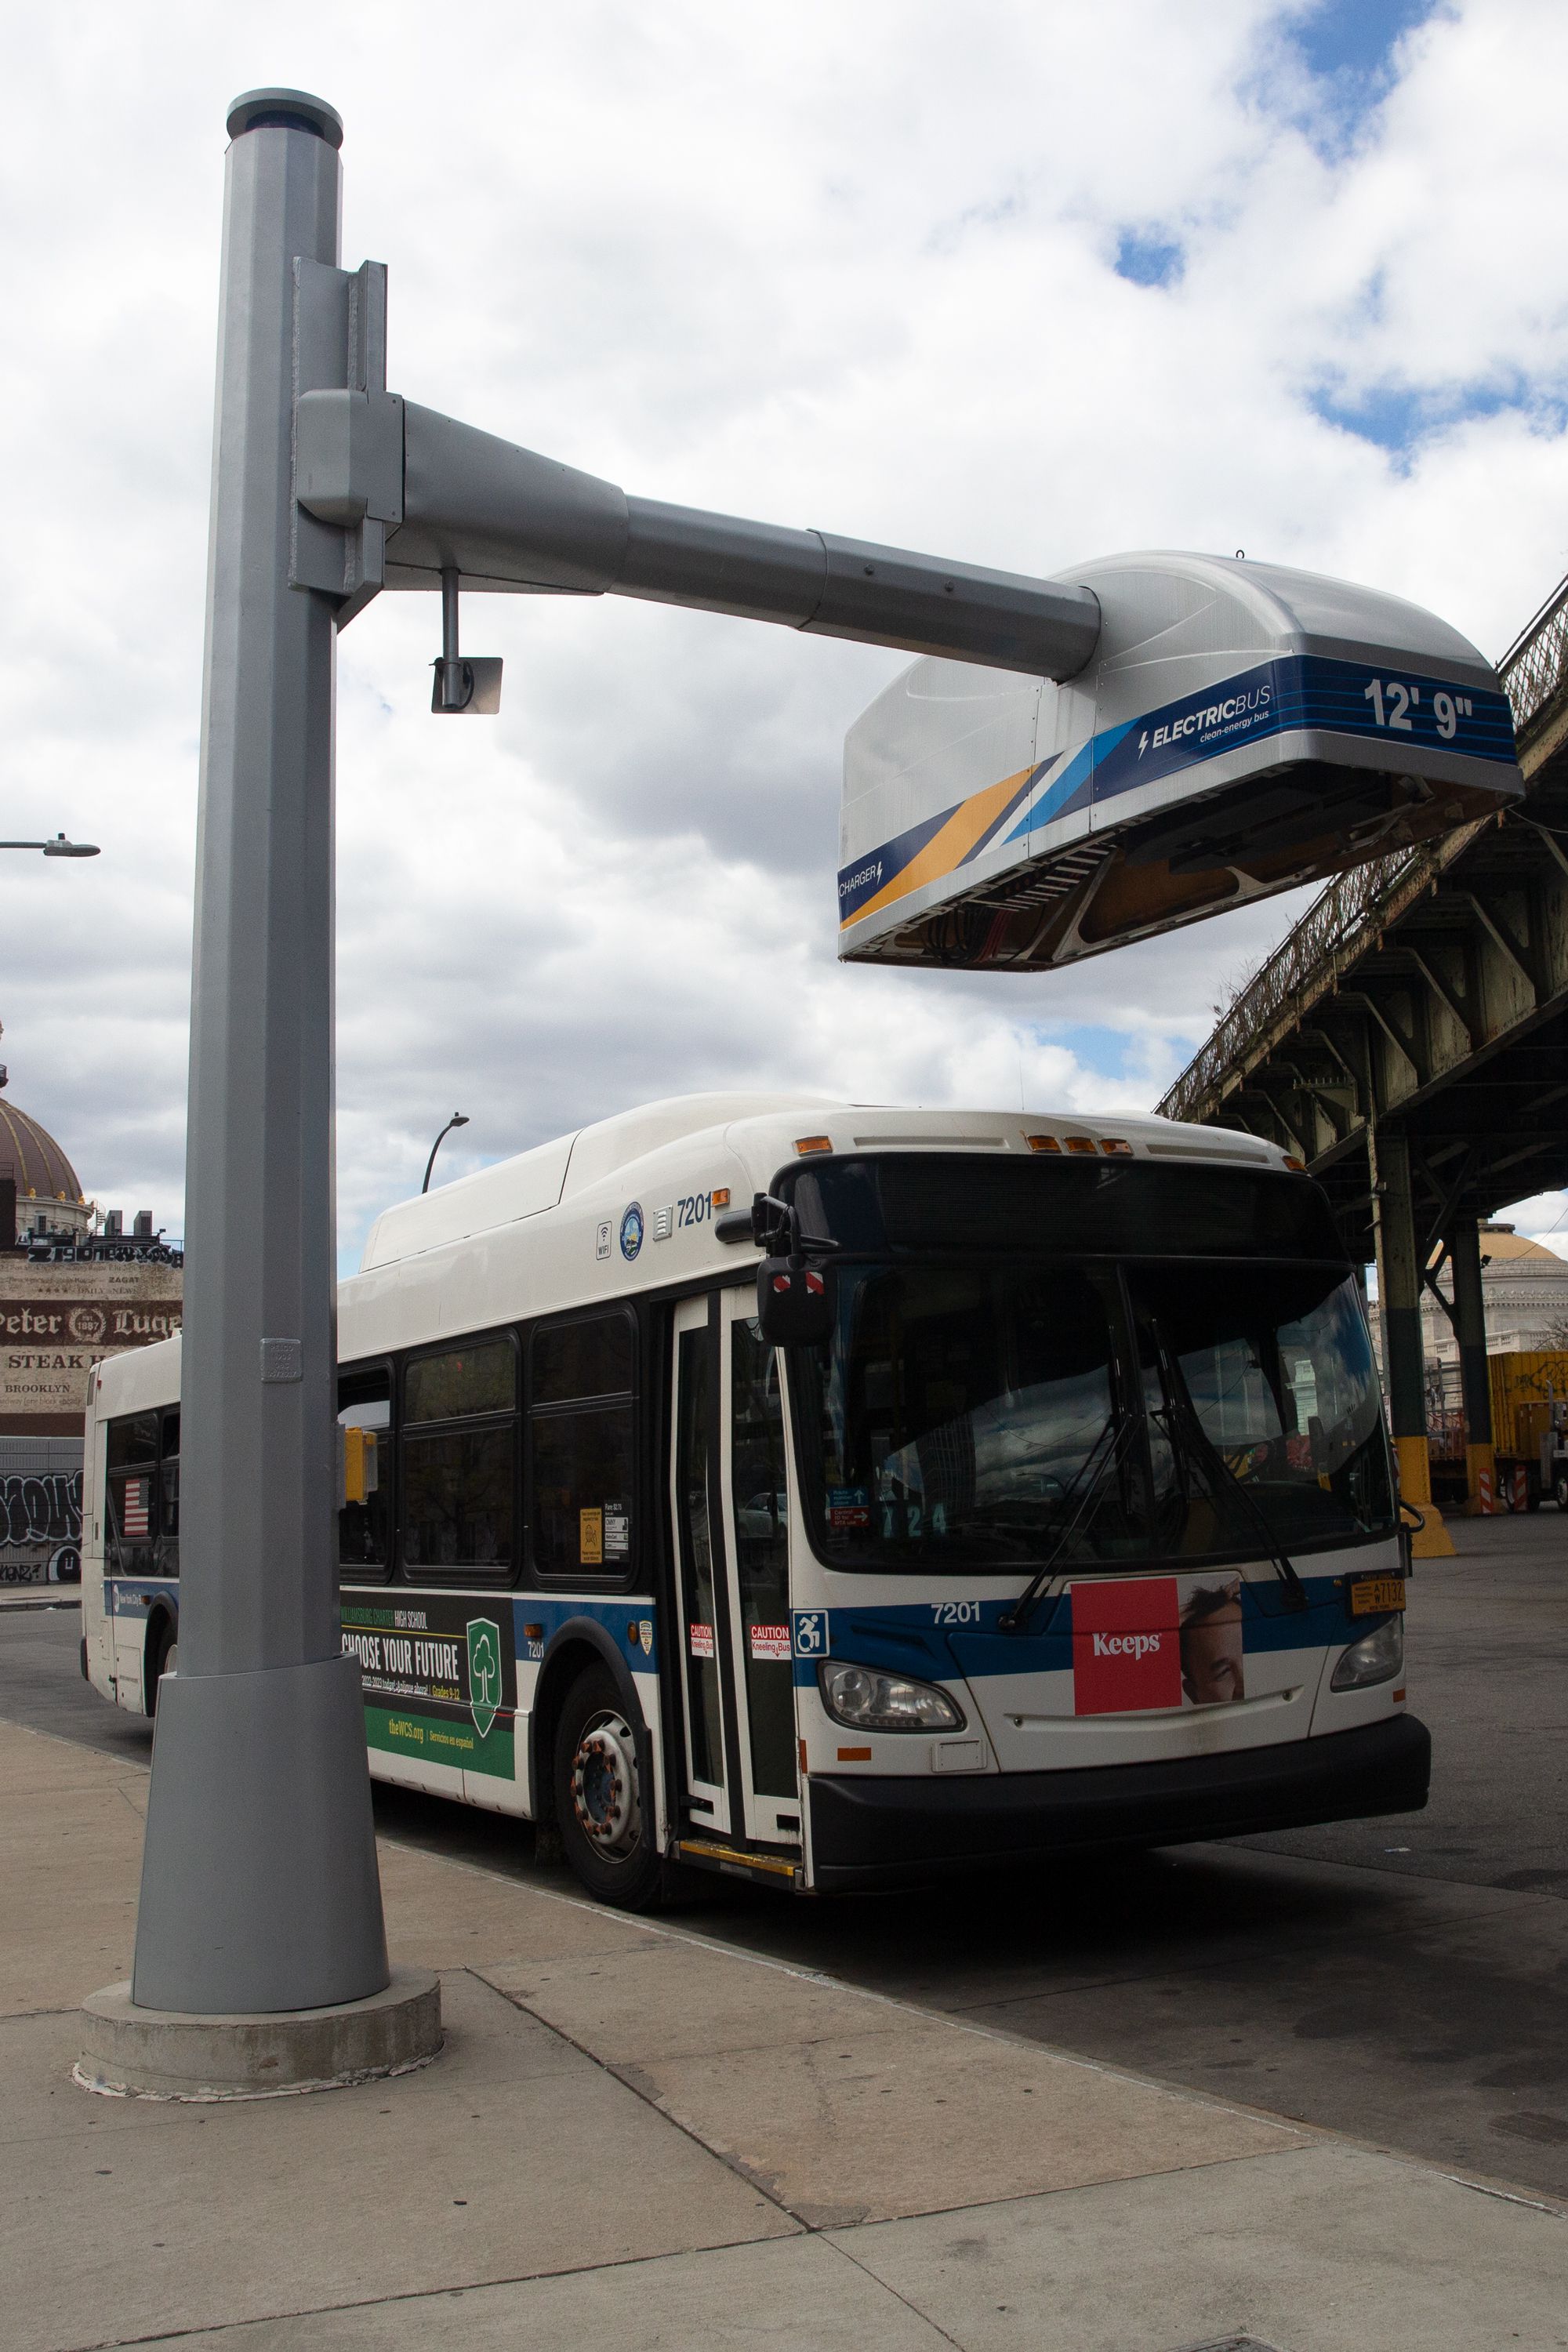 An electric bus charger was stationed at the Williamsburg bus depot, April 27, 2022.